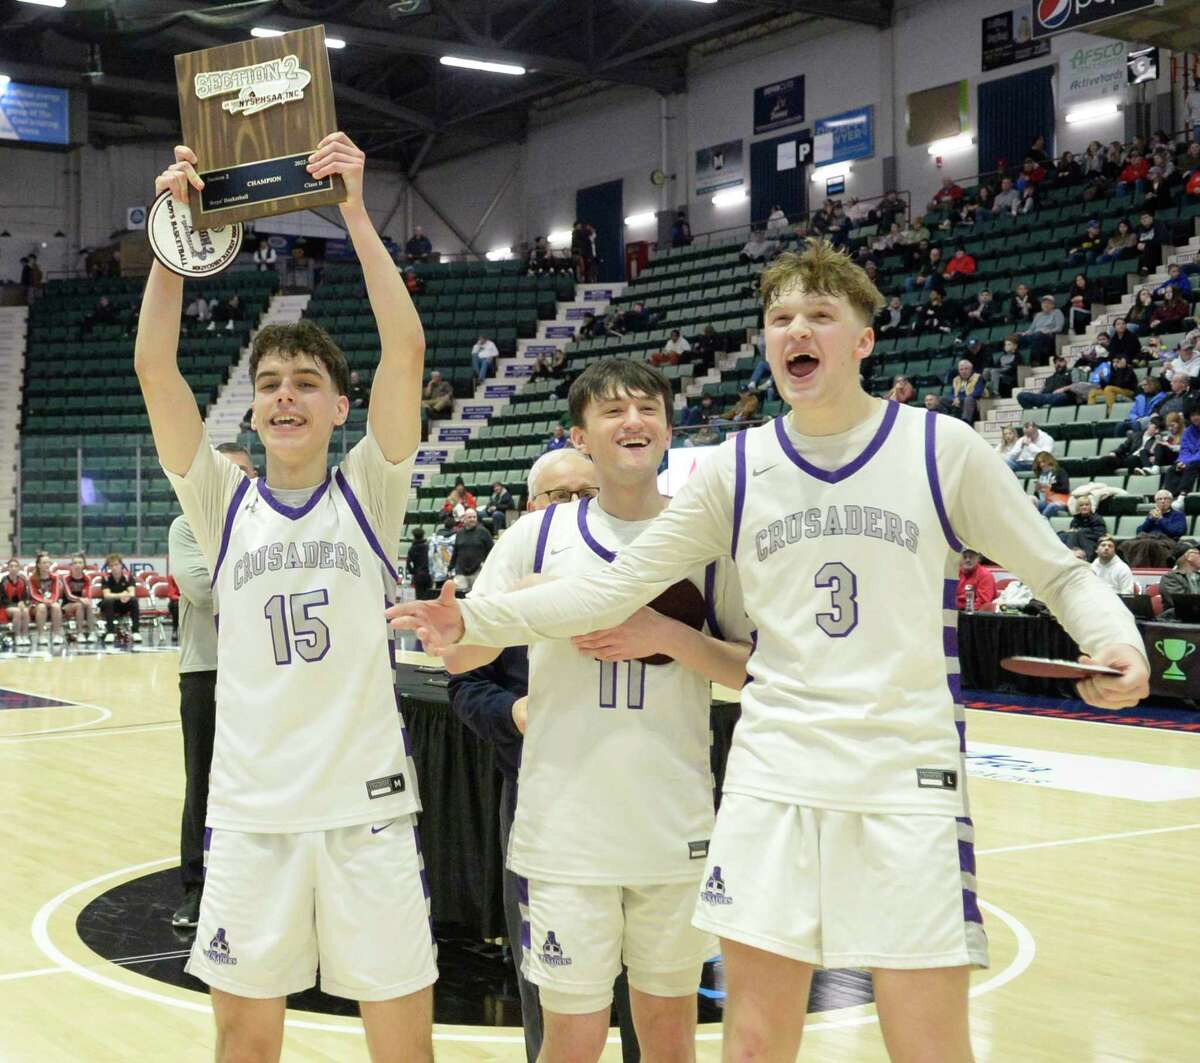 Catholic Central seniors Nick Riley (15), Nick Schrom (11), and Connor Gemmill present the Section II Champions plaque to their teammates following their win over Glens Falls in the Class B Championship at Cool Insuring Arena in Glens Falls, N.Y. on Saturday, Mar. 4, 2023. (Jenn March, Special to the Times Union)